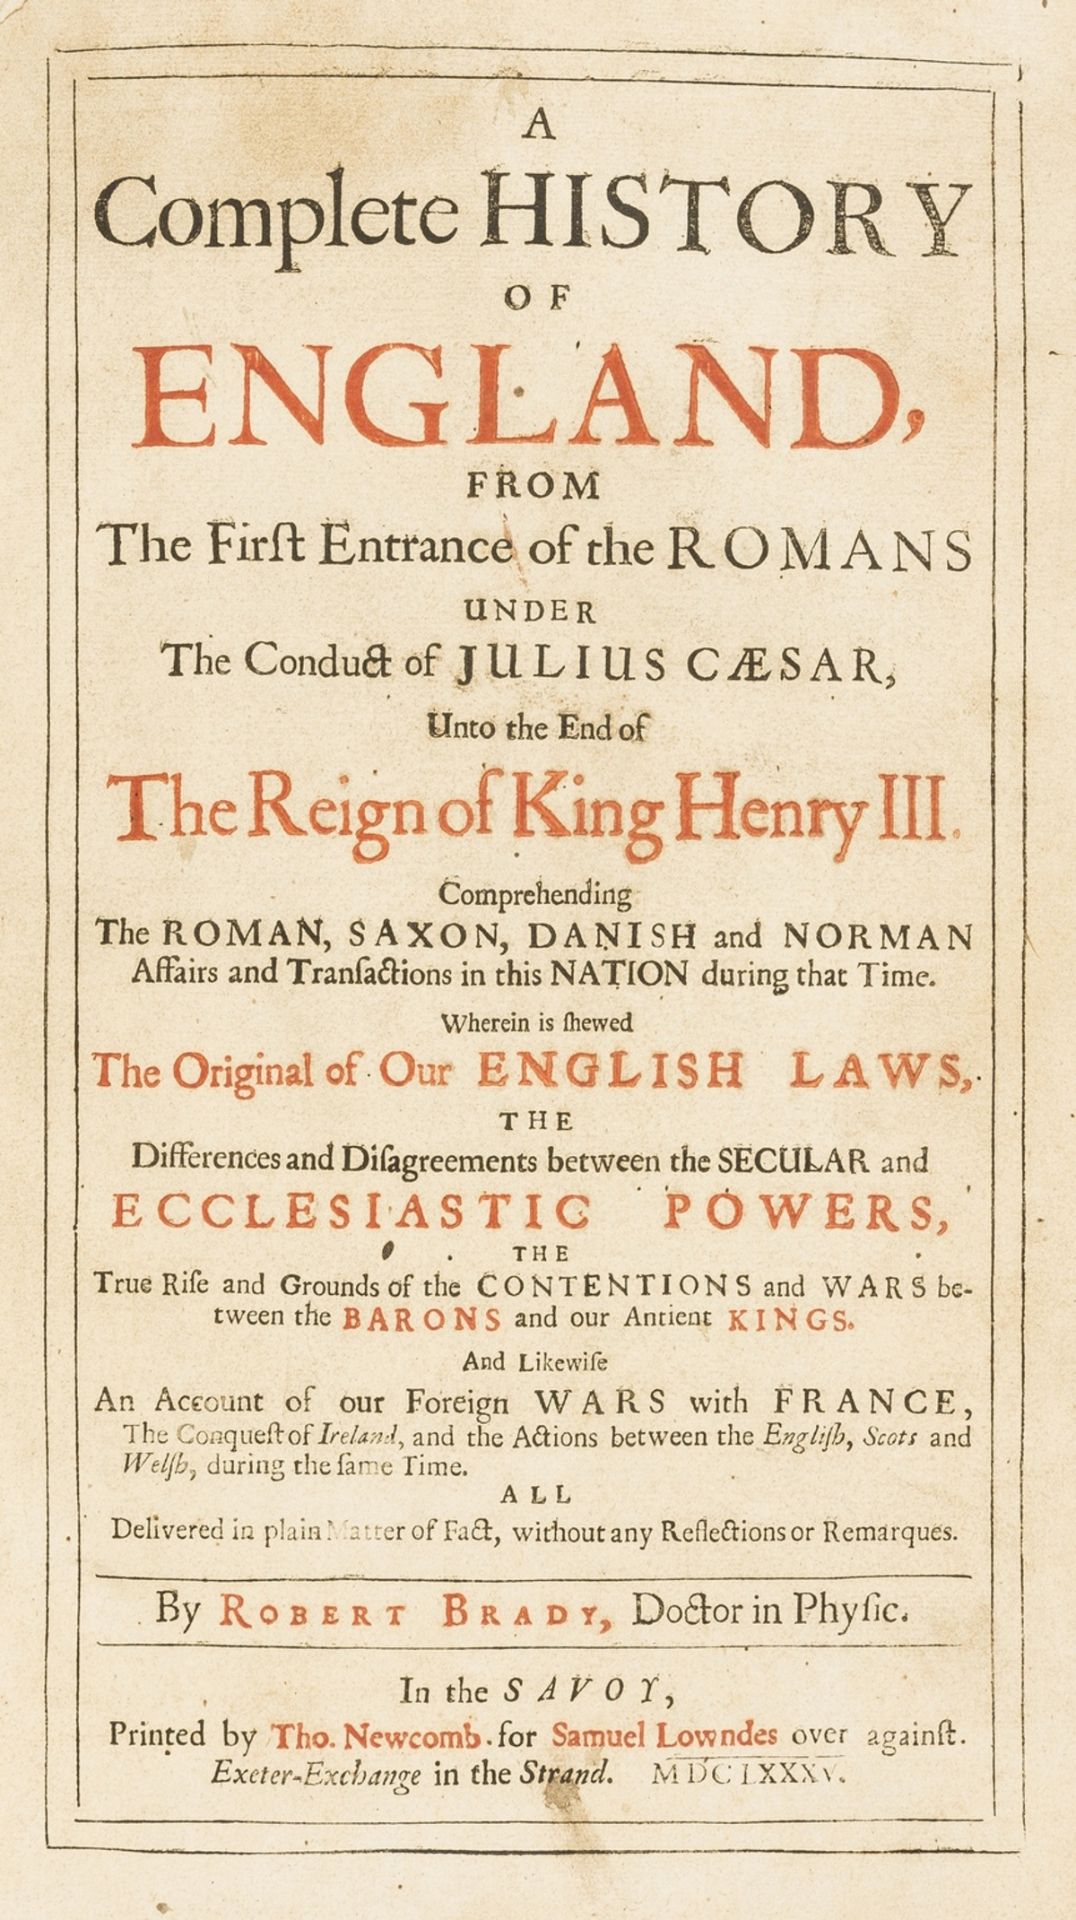 Brady (Robert) A Complete History of England, from the first Entrance of the Romans..., first …